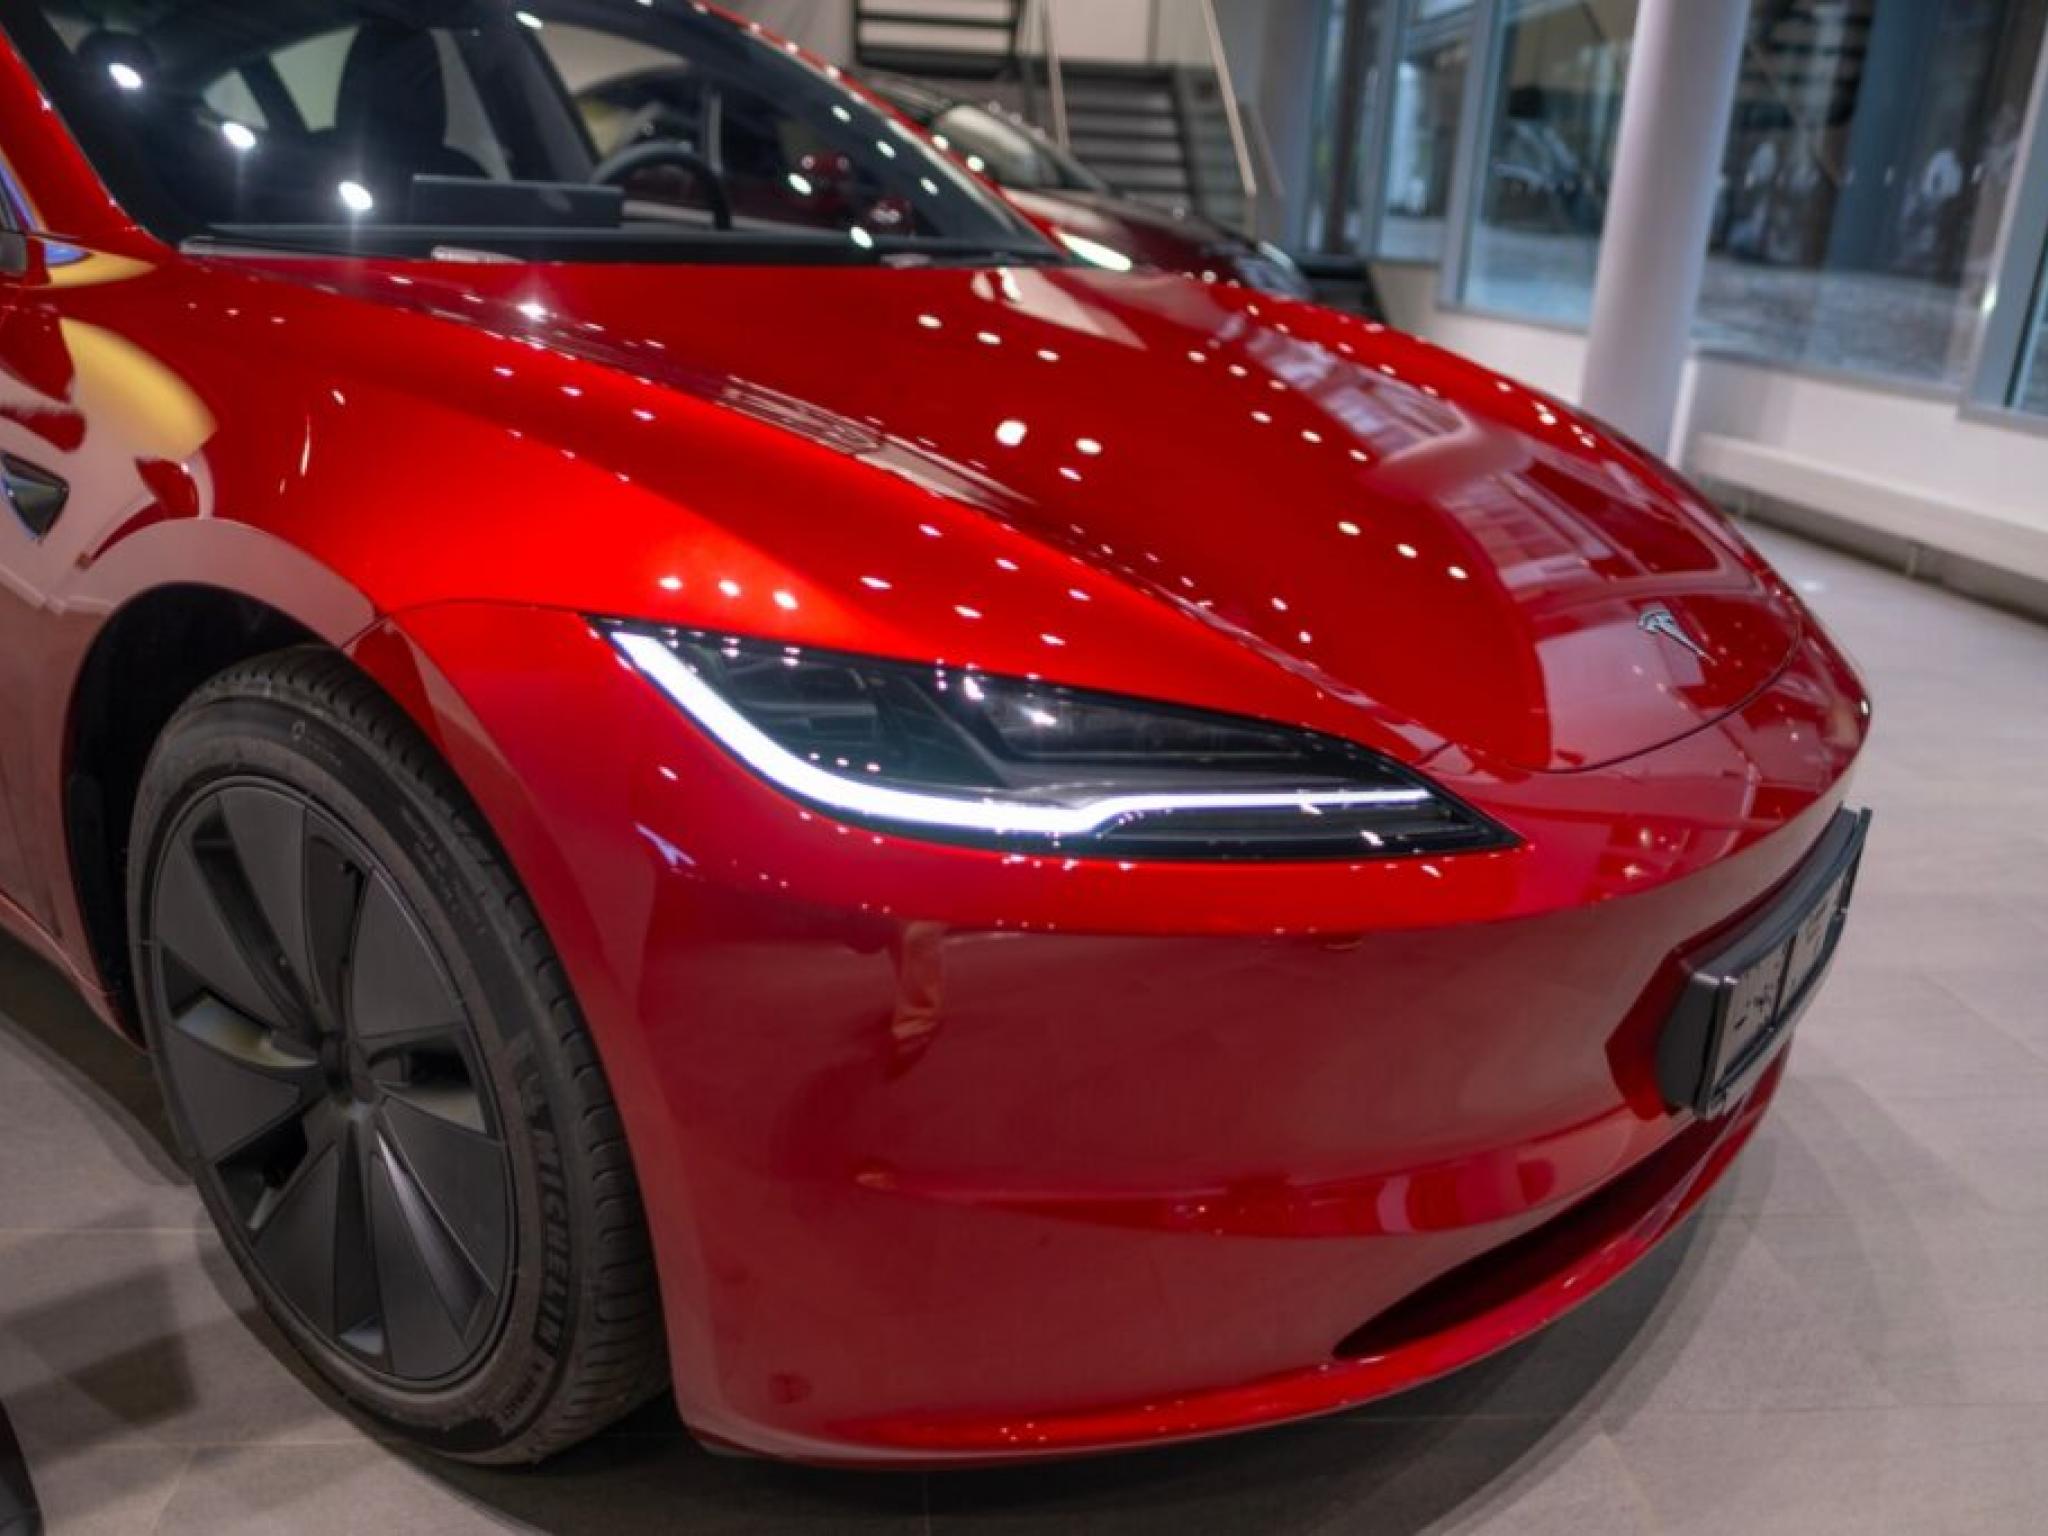  tesla-faces-tough-road-ahead-analyst-predicts-lower-earnings-citing-market-and-production-hurdles 